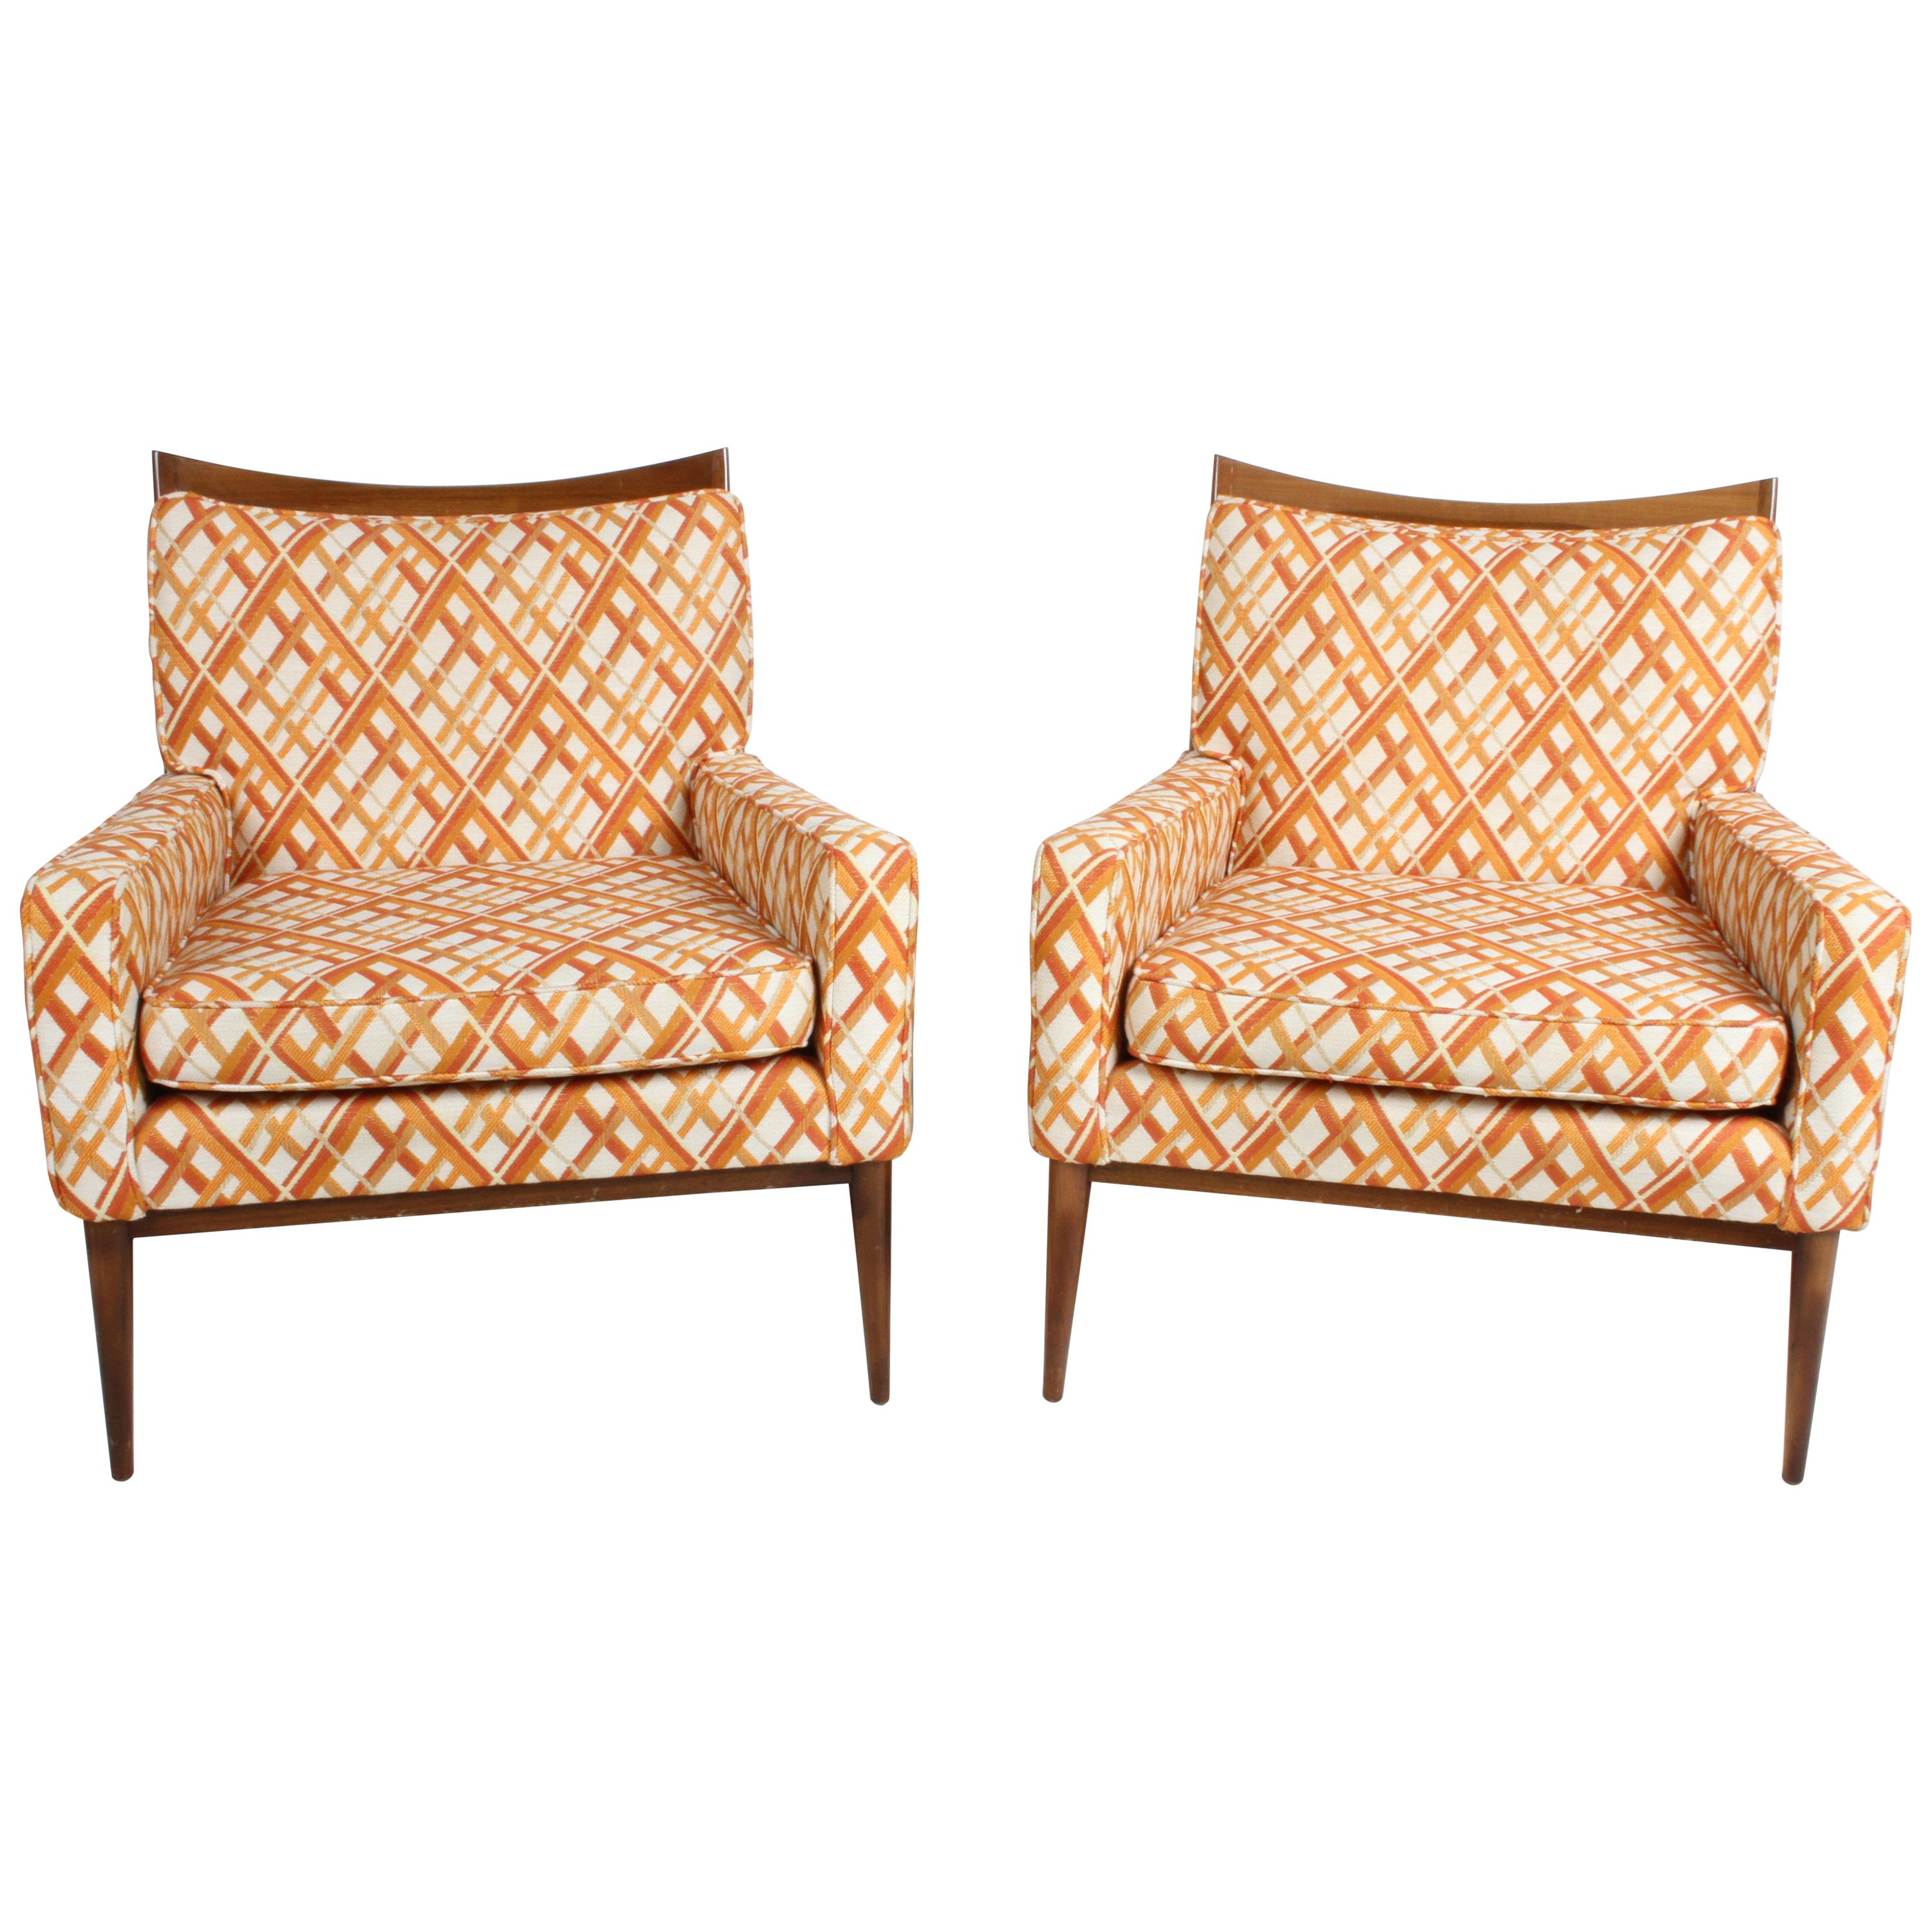 Pair of Paul McCobb for Directional Model 1322 Lounge Chairs, Original Fabric